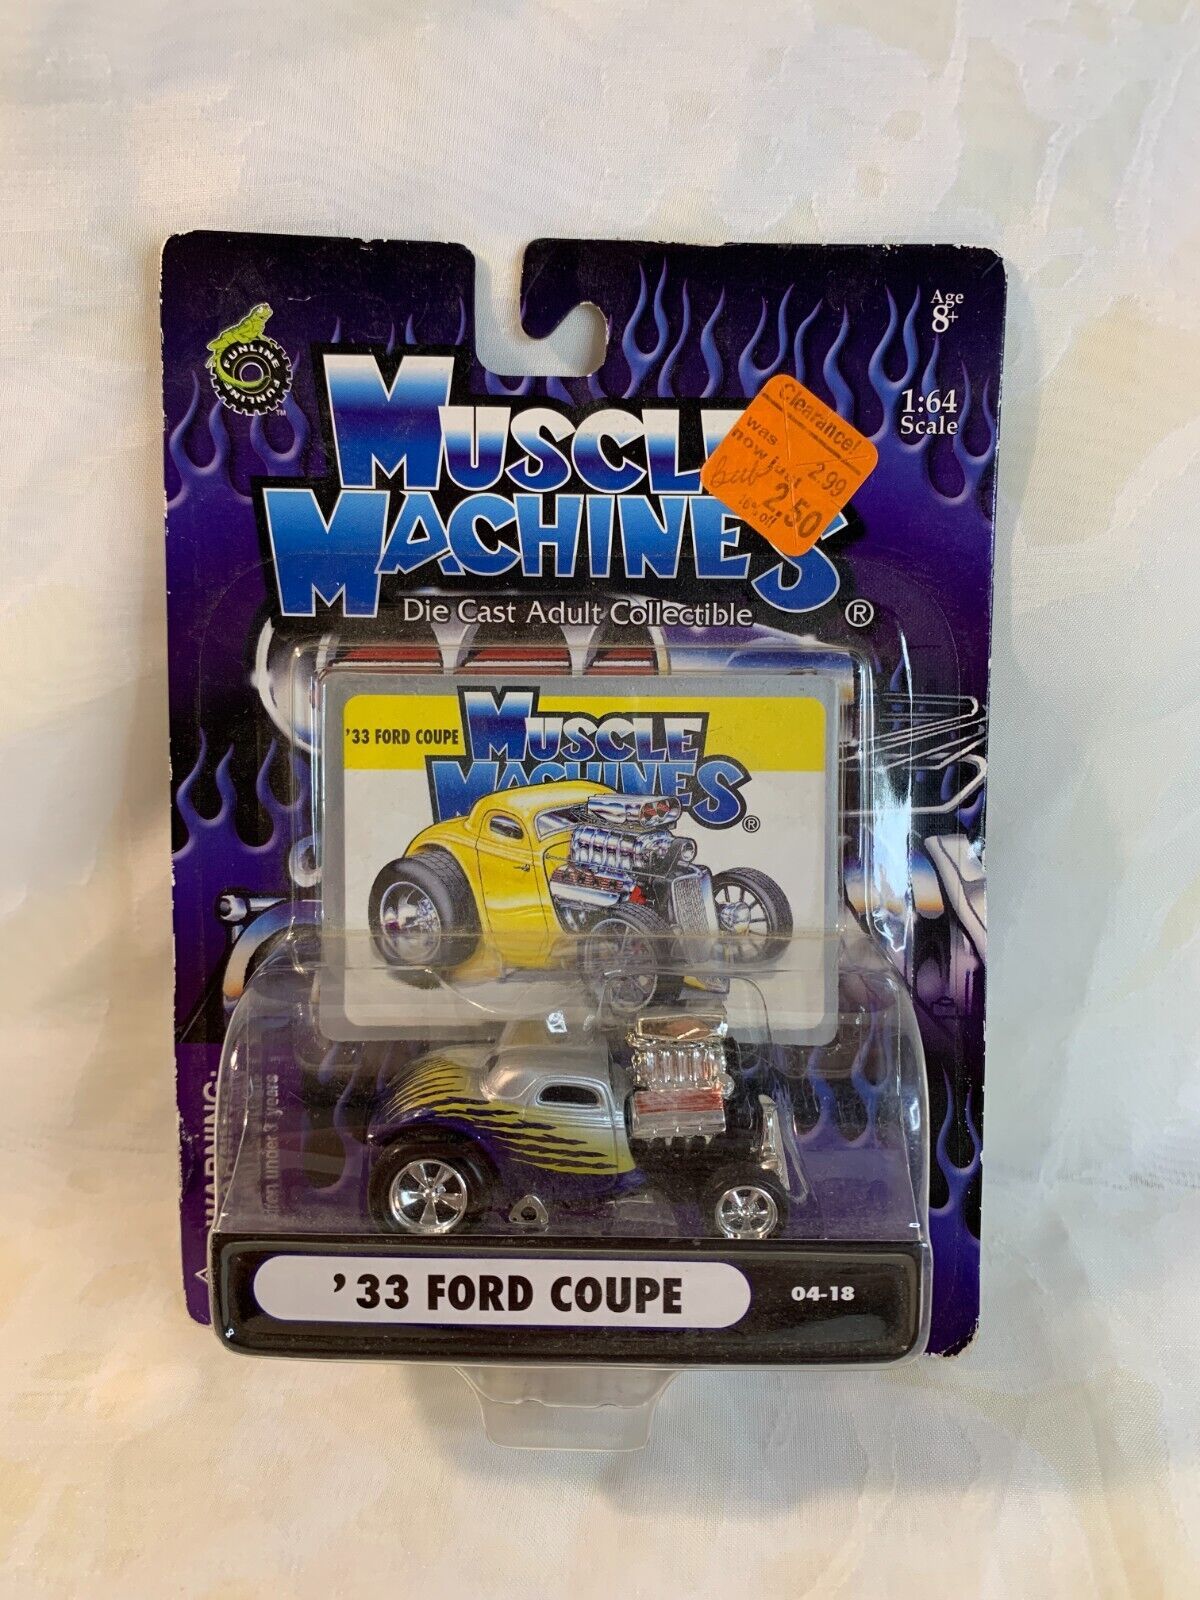 Muscle Machines Silver '33 Ford Coupe Die Cast Adult Collectible 2004 Funline - $9.75